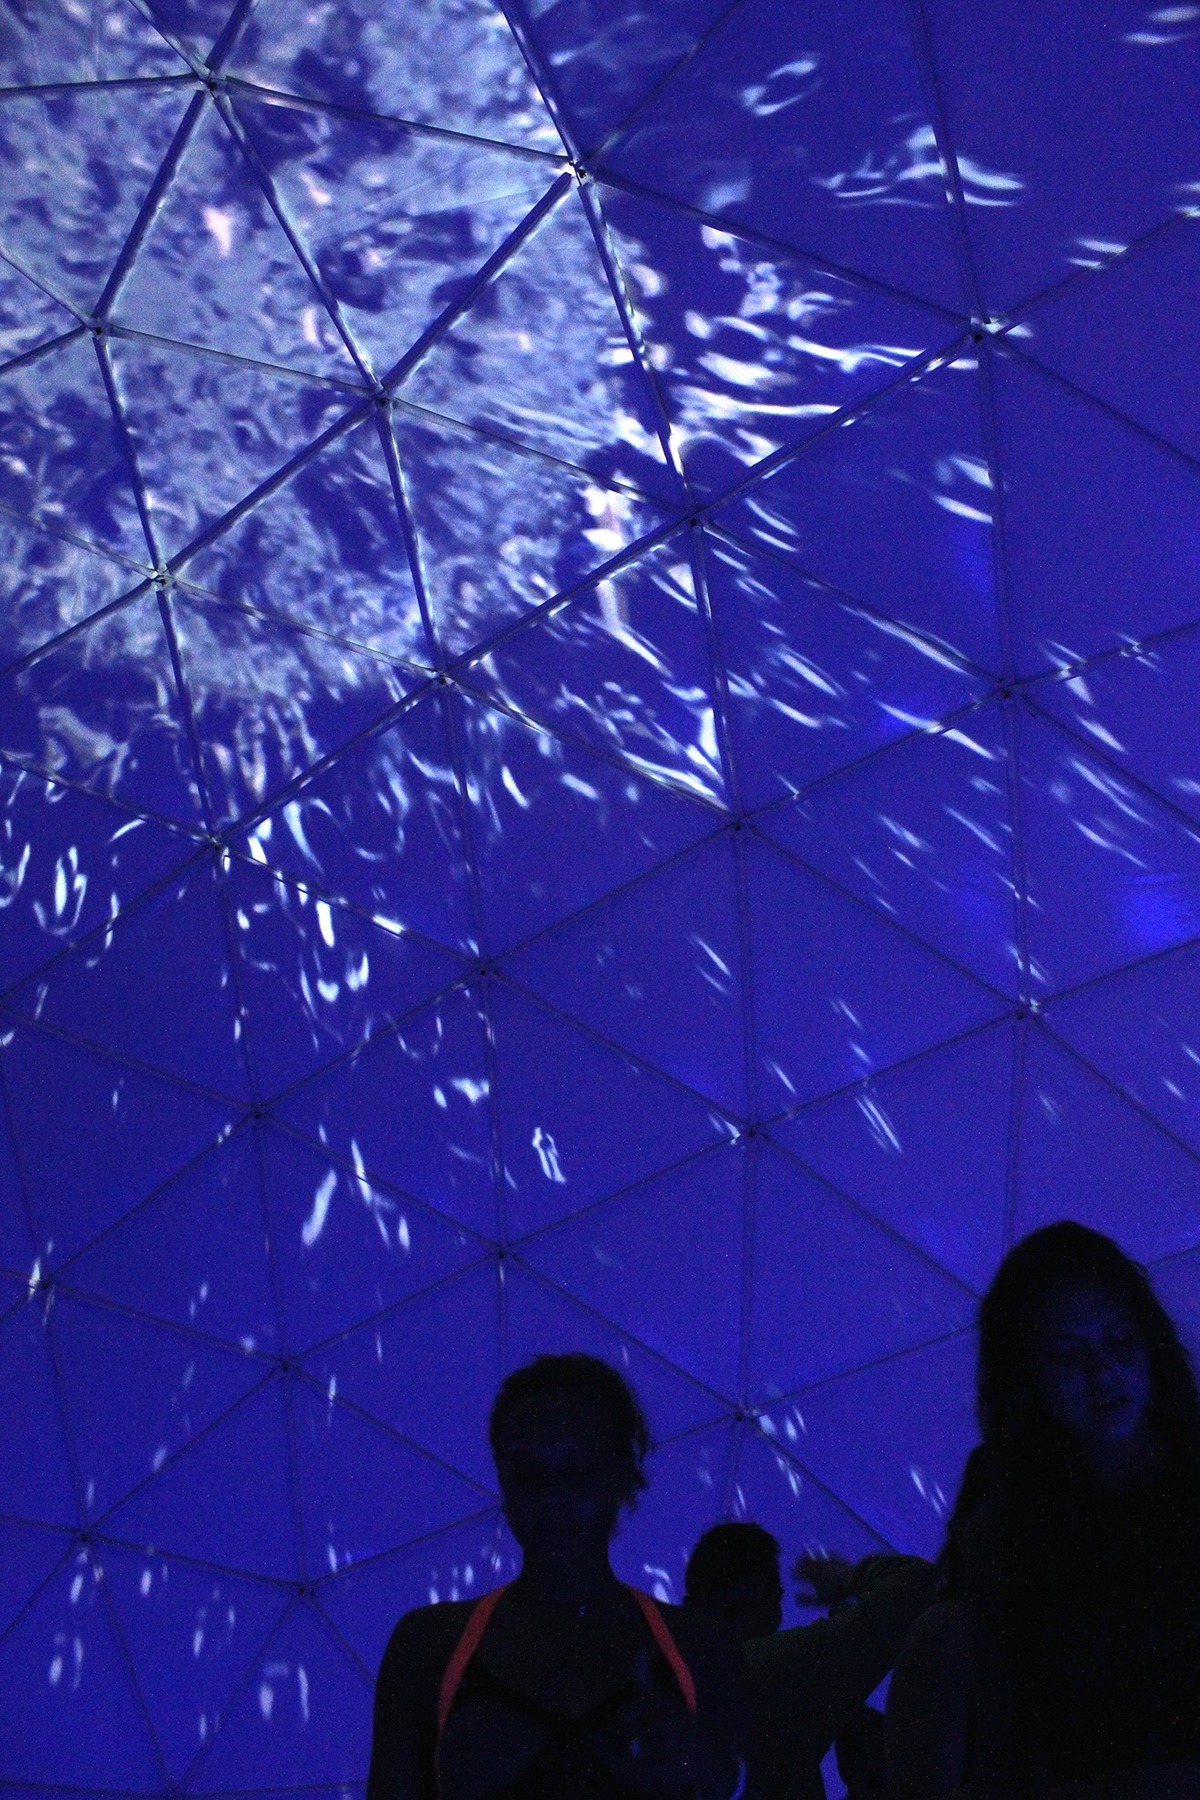 Brita projection mapping dome Geodesic